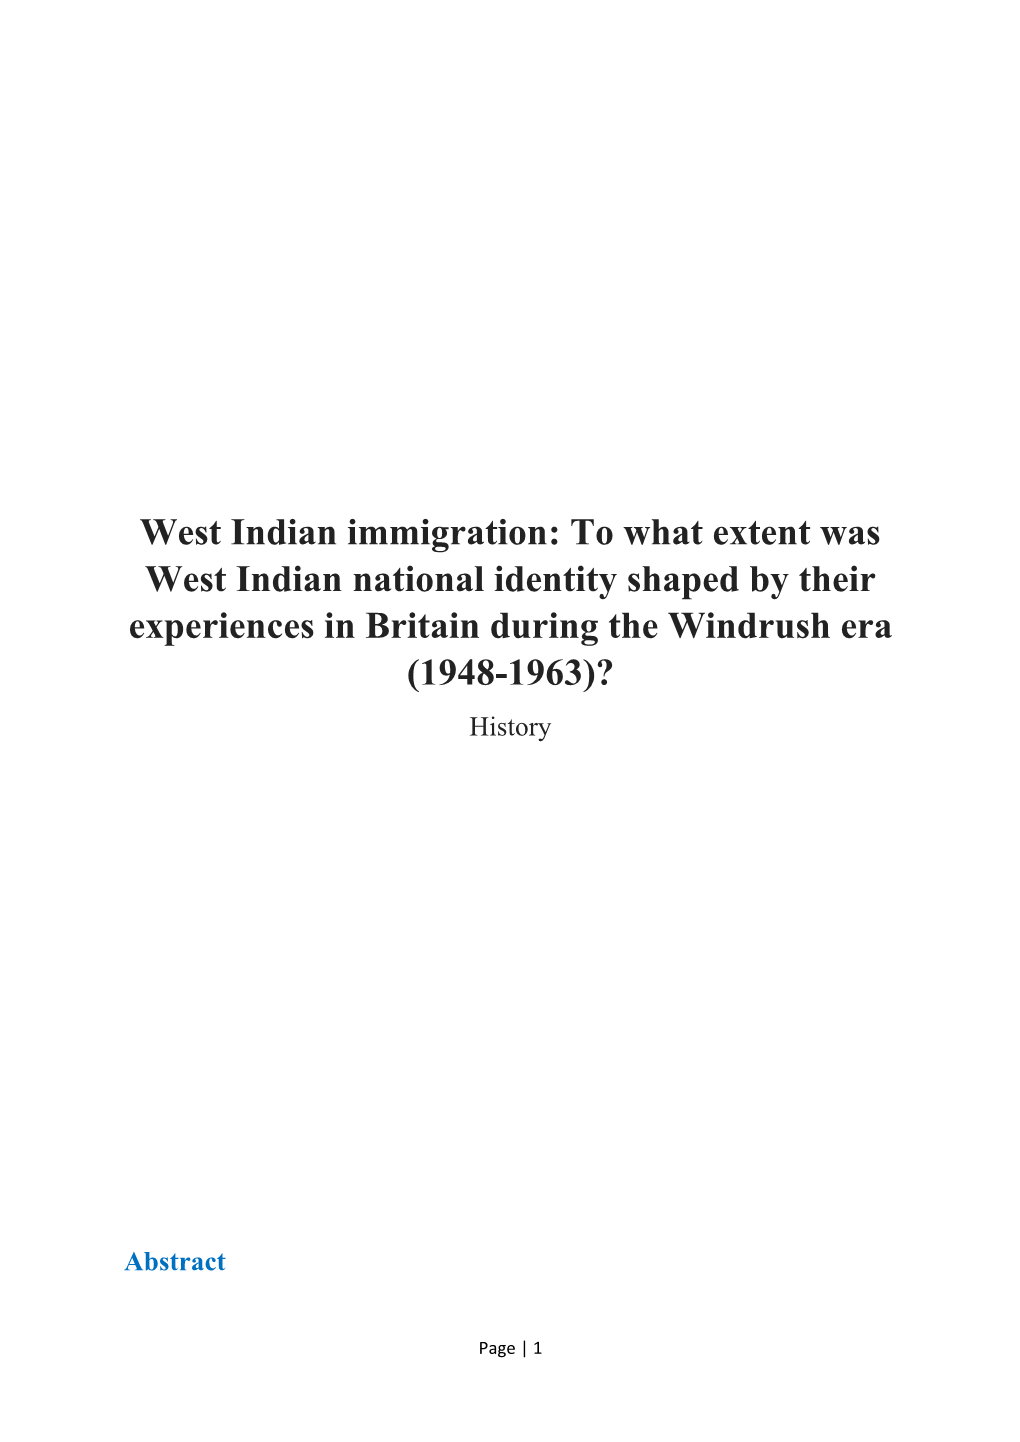 West Indian Immigration: to What Extent Was West Indian National Identity Shaped by Their Experiences in Britain During the Windrush Era (1948-1963)? History